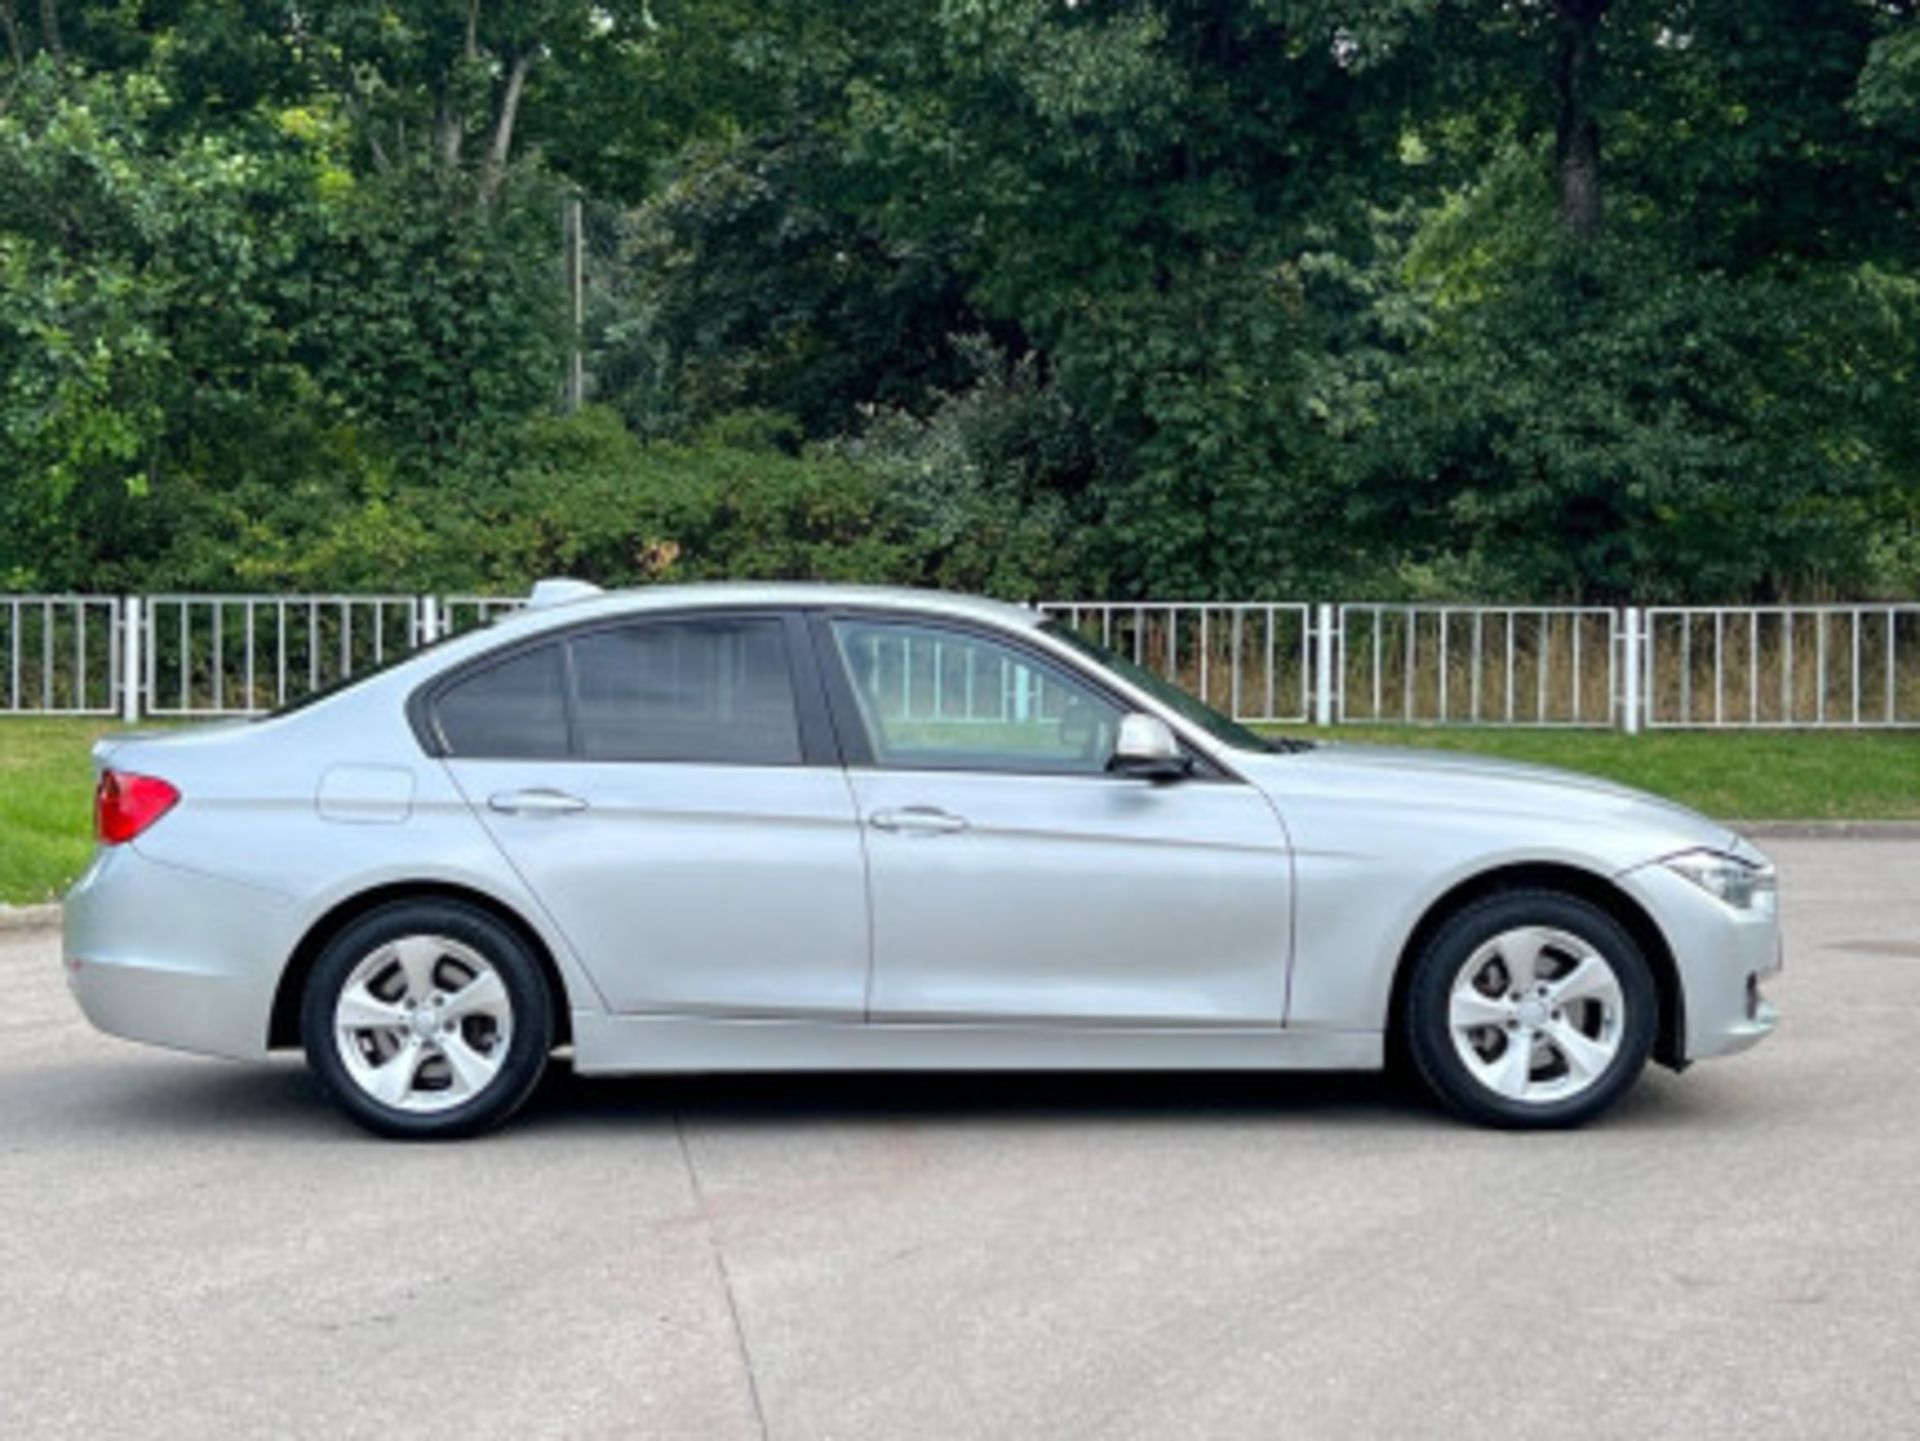 BMW 3 SERIES 2.0 DIESEL ED START STOP - A WELL-MAINTAINED GEM >>--NO VAT ON HAMMER--<< - Image 130 of 229